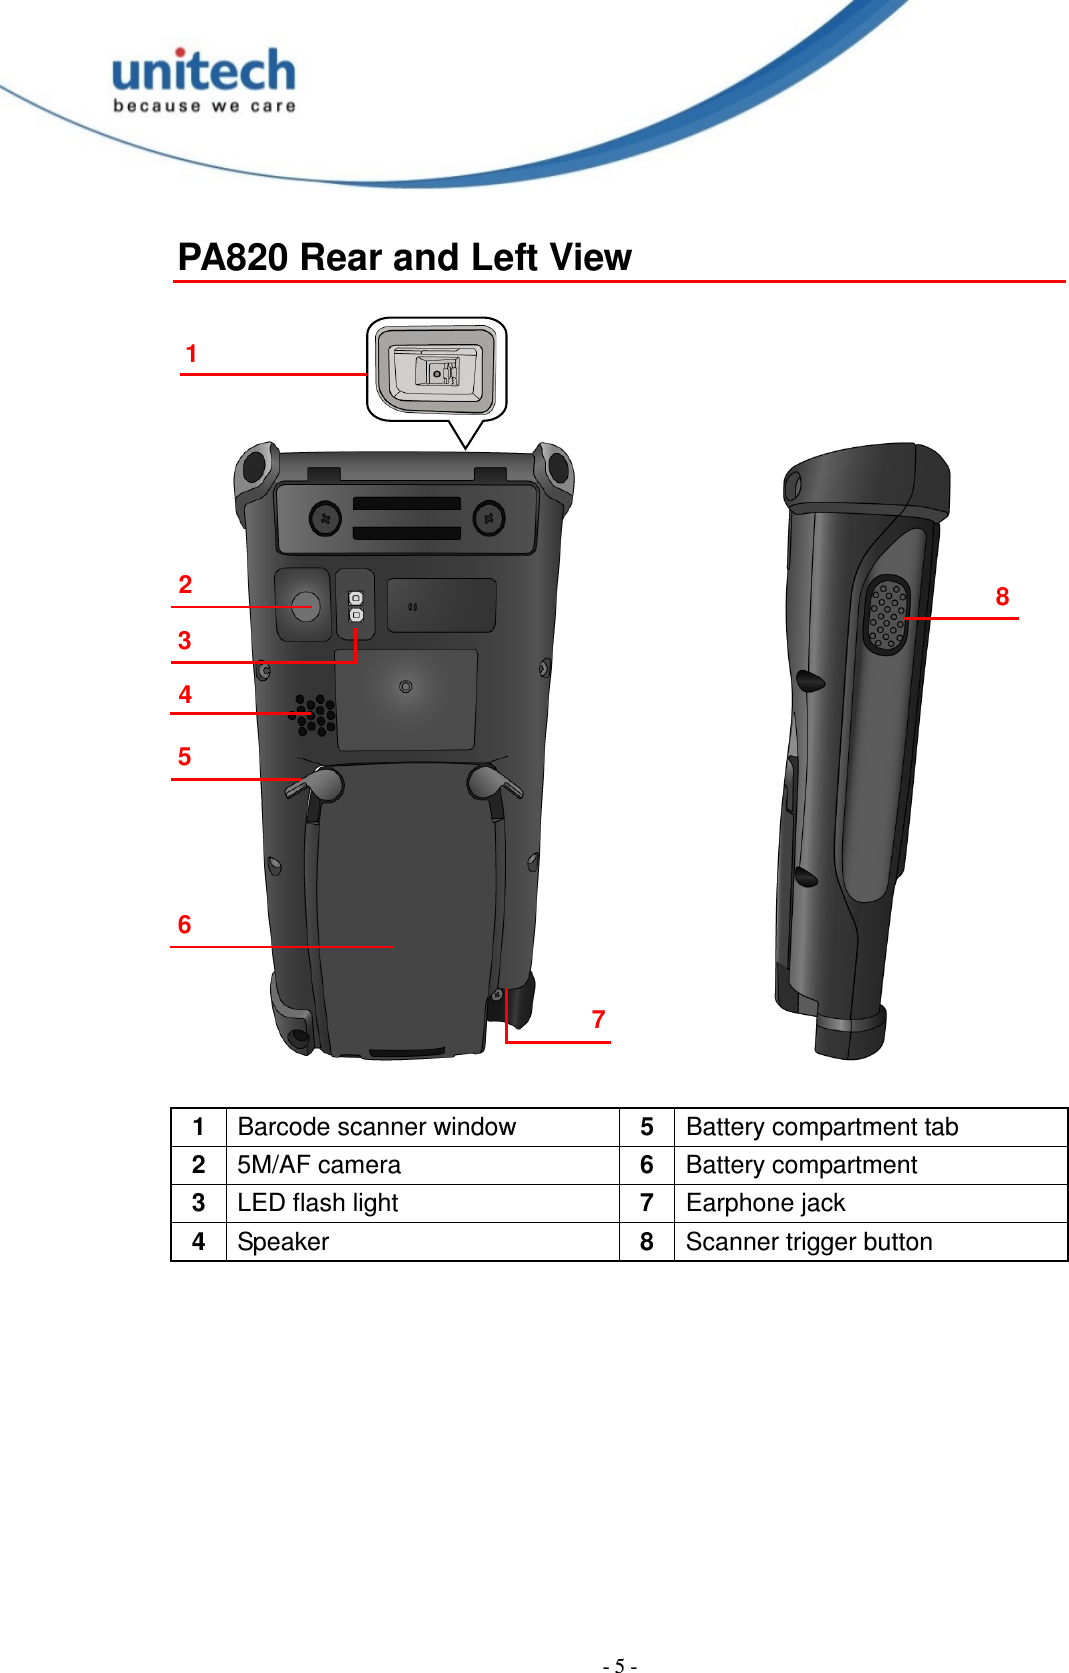  - 5 - PA820 Rear and Left View                            1  Barcode scanner window  5  Battery compartment tab 2  5M/AF camera  6  Battery compartment 3  LED flash light  7  Earphone jack 4  Speaker  8  Scanner trigger button  1 2 3 4 5 6 7 8 